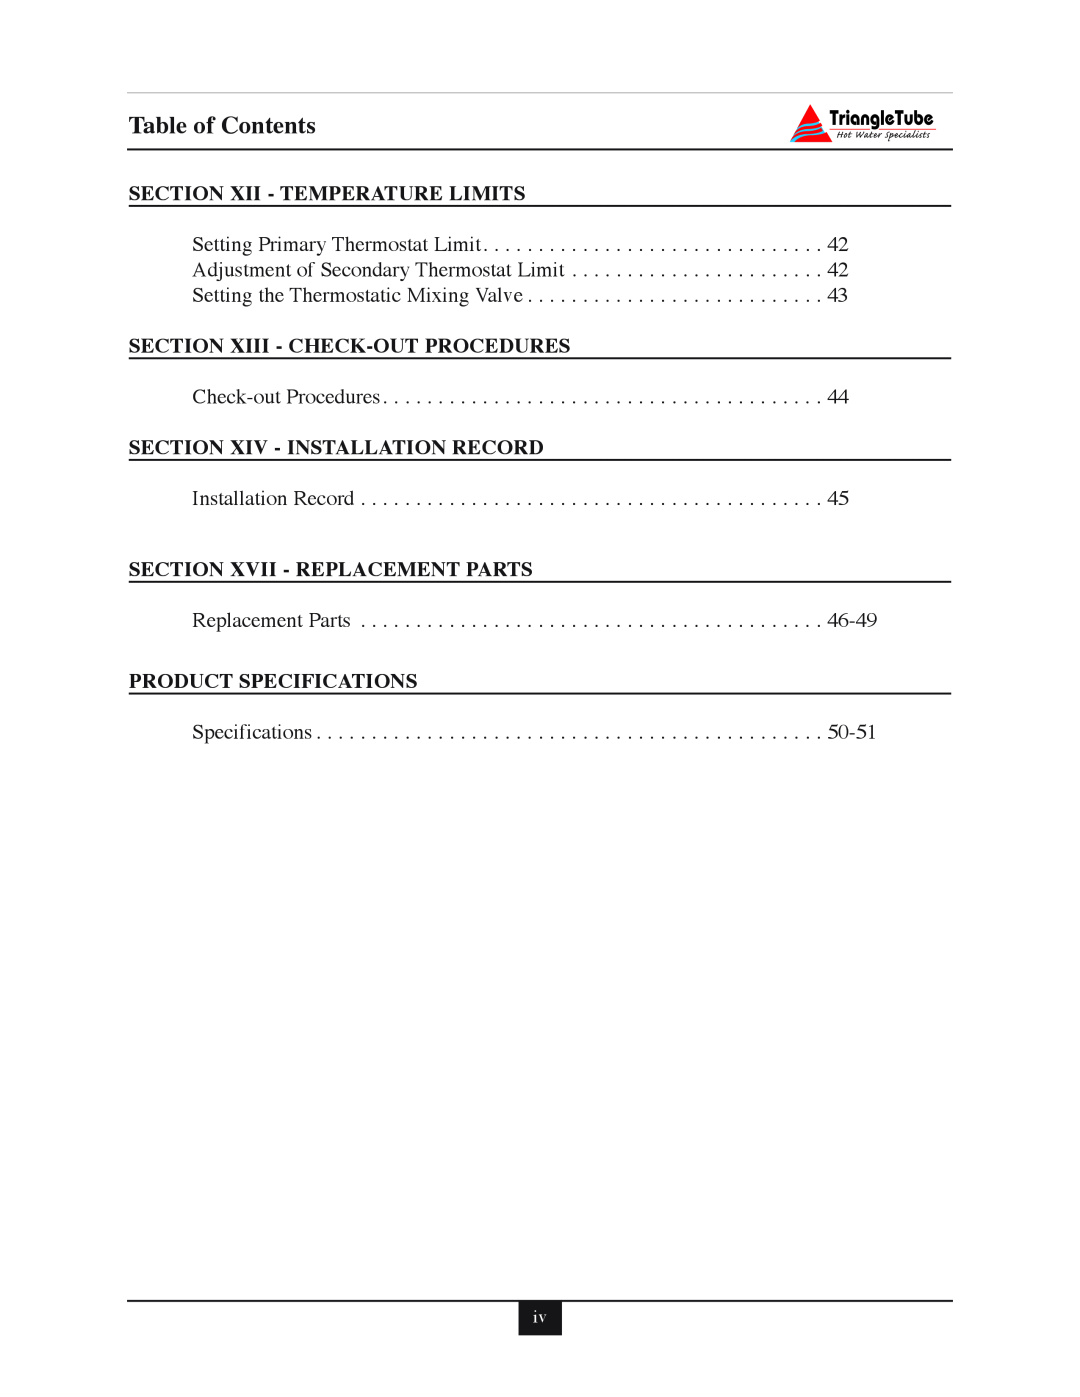 Delta F-25 Table of Contents, Section Xii - Temperature Limits, Section Xiii - Check-Outprocedures, Product Specifications 